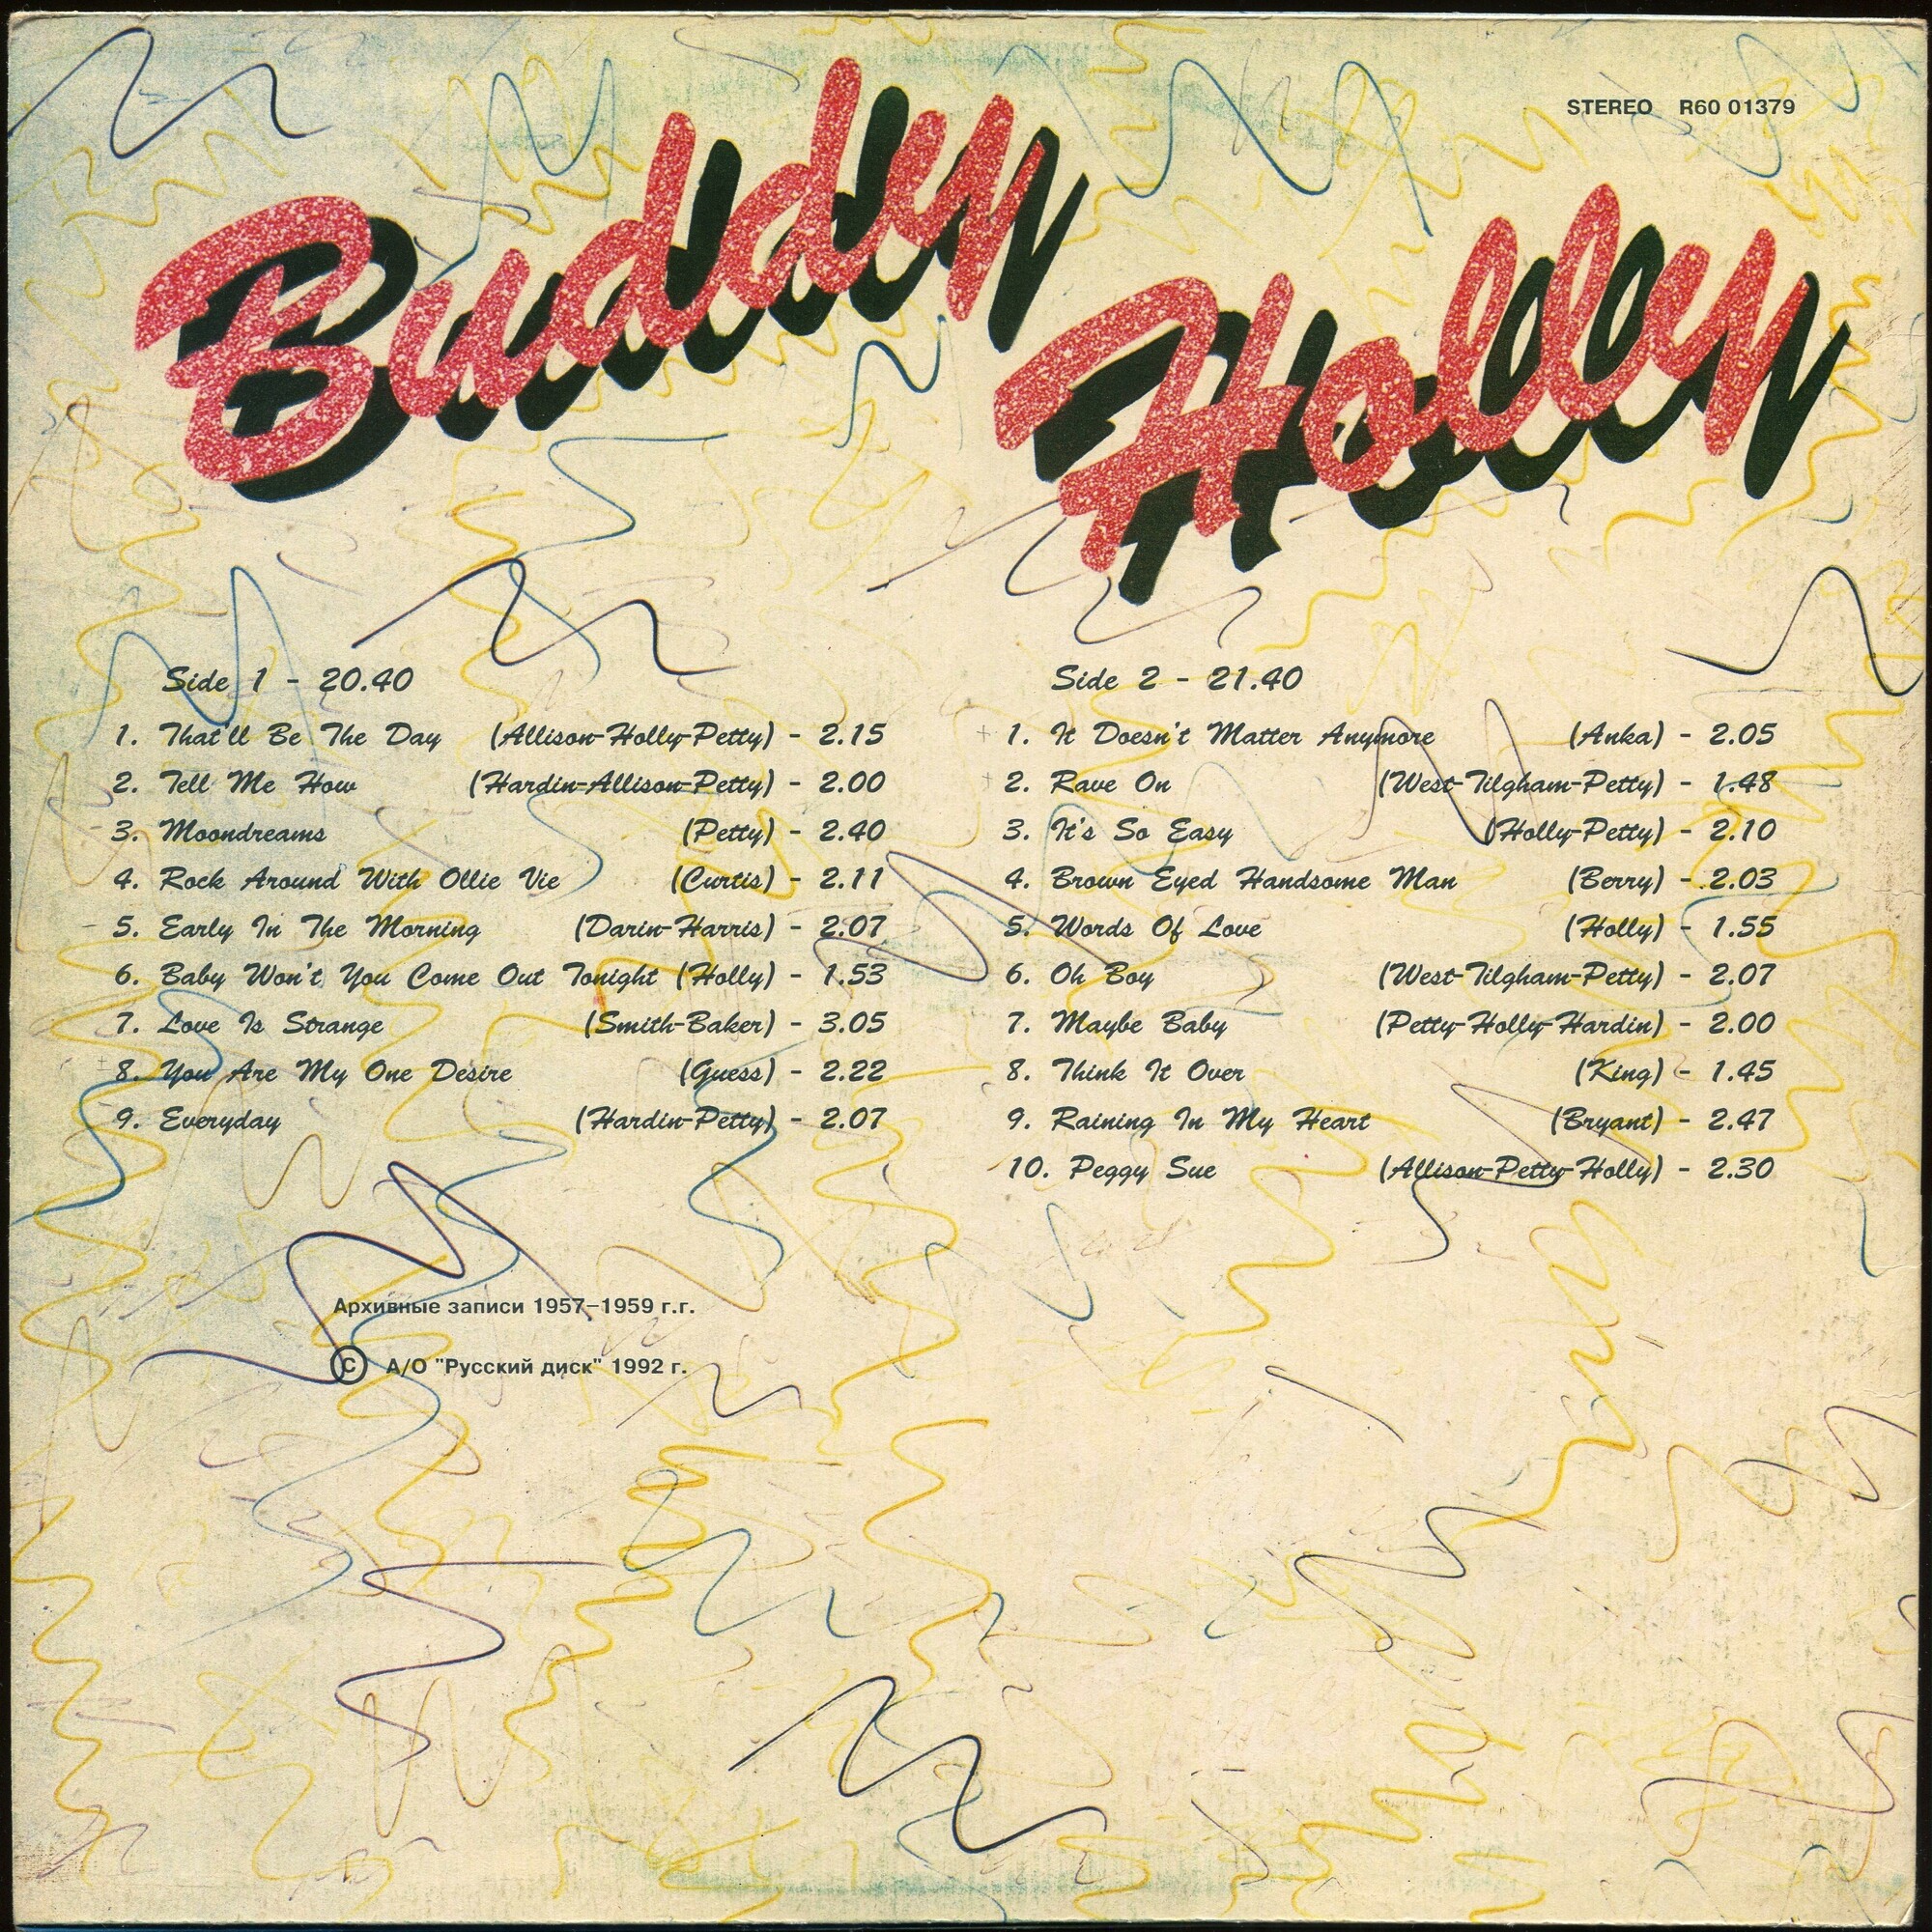 BUDDY HOLLY – “That’ll Be The Day”